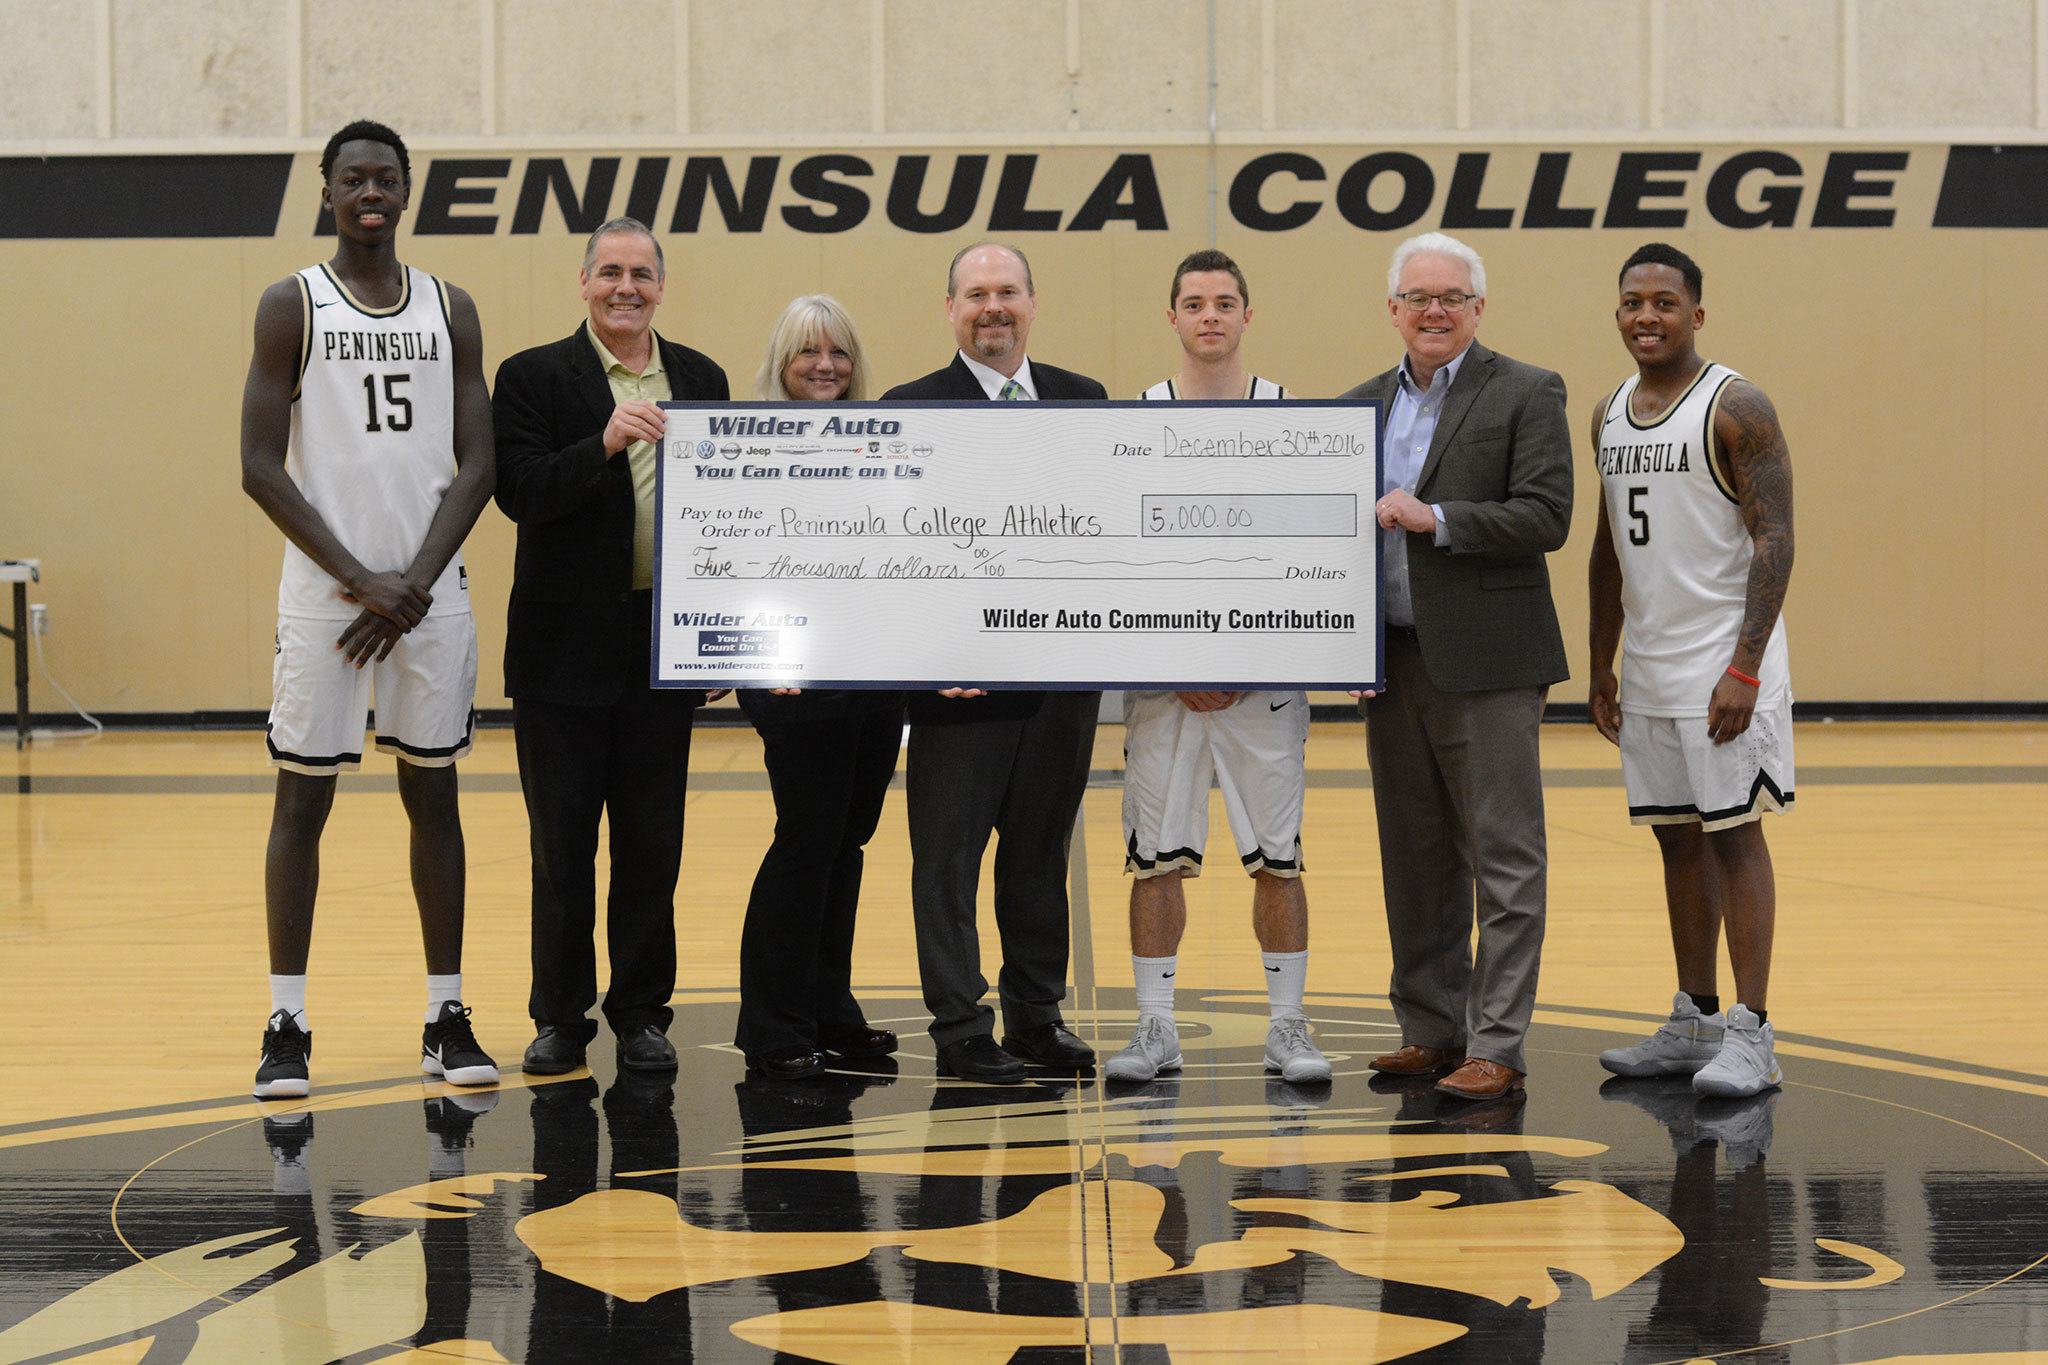 From left are Pirates’ basketball player Omar Lo, Athletic Director Rick Ross, Tami Rose and Dan Wilder Jr. from Wilder Auto, basketball player Jalon McCullough, Peninsula College President Dr. Luke Robins and basketball player Darrion Daniels. The donation to the Pirate Athletic Association will go toward supporting athletic scholarships.